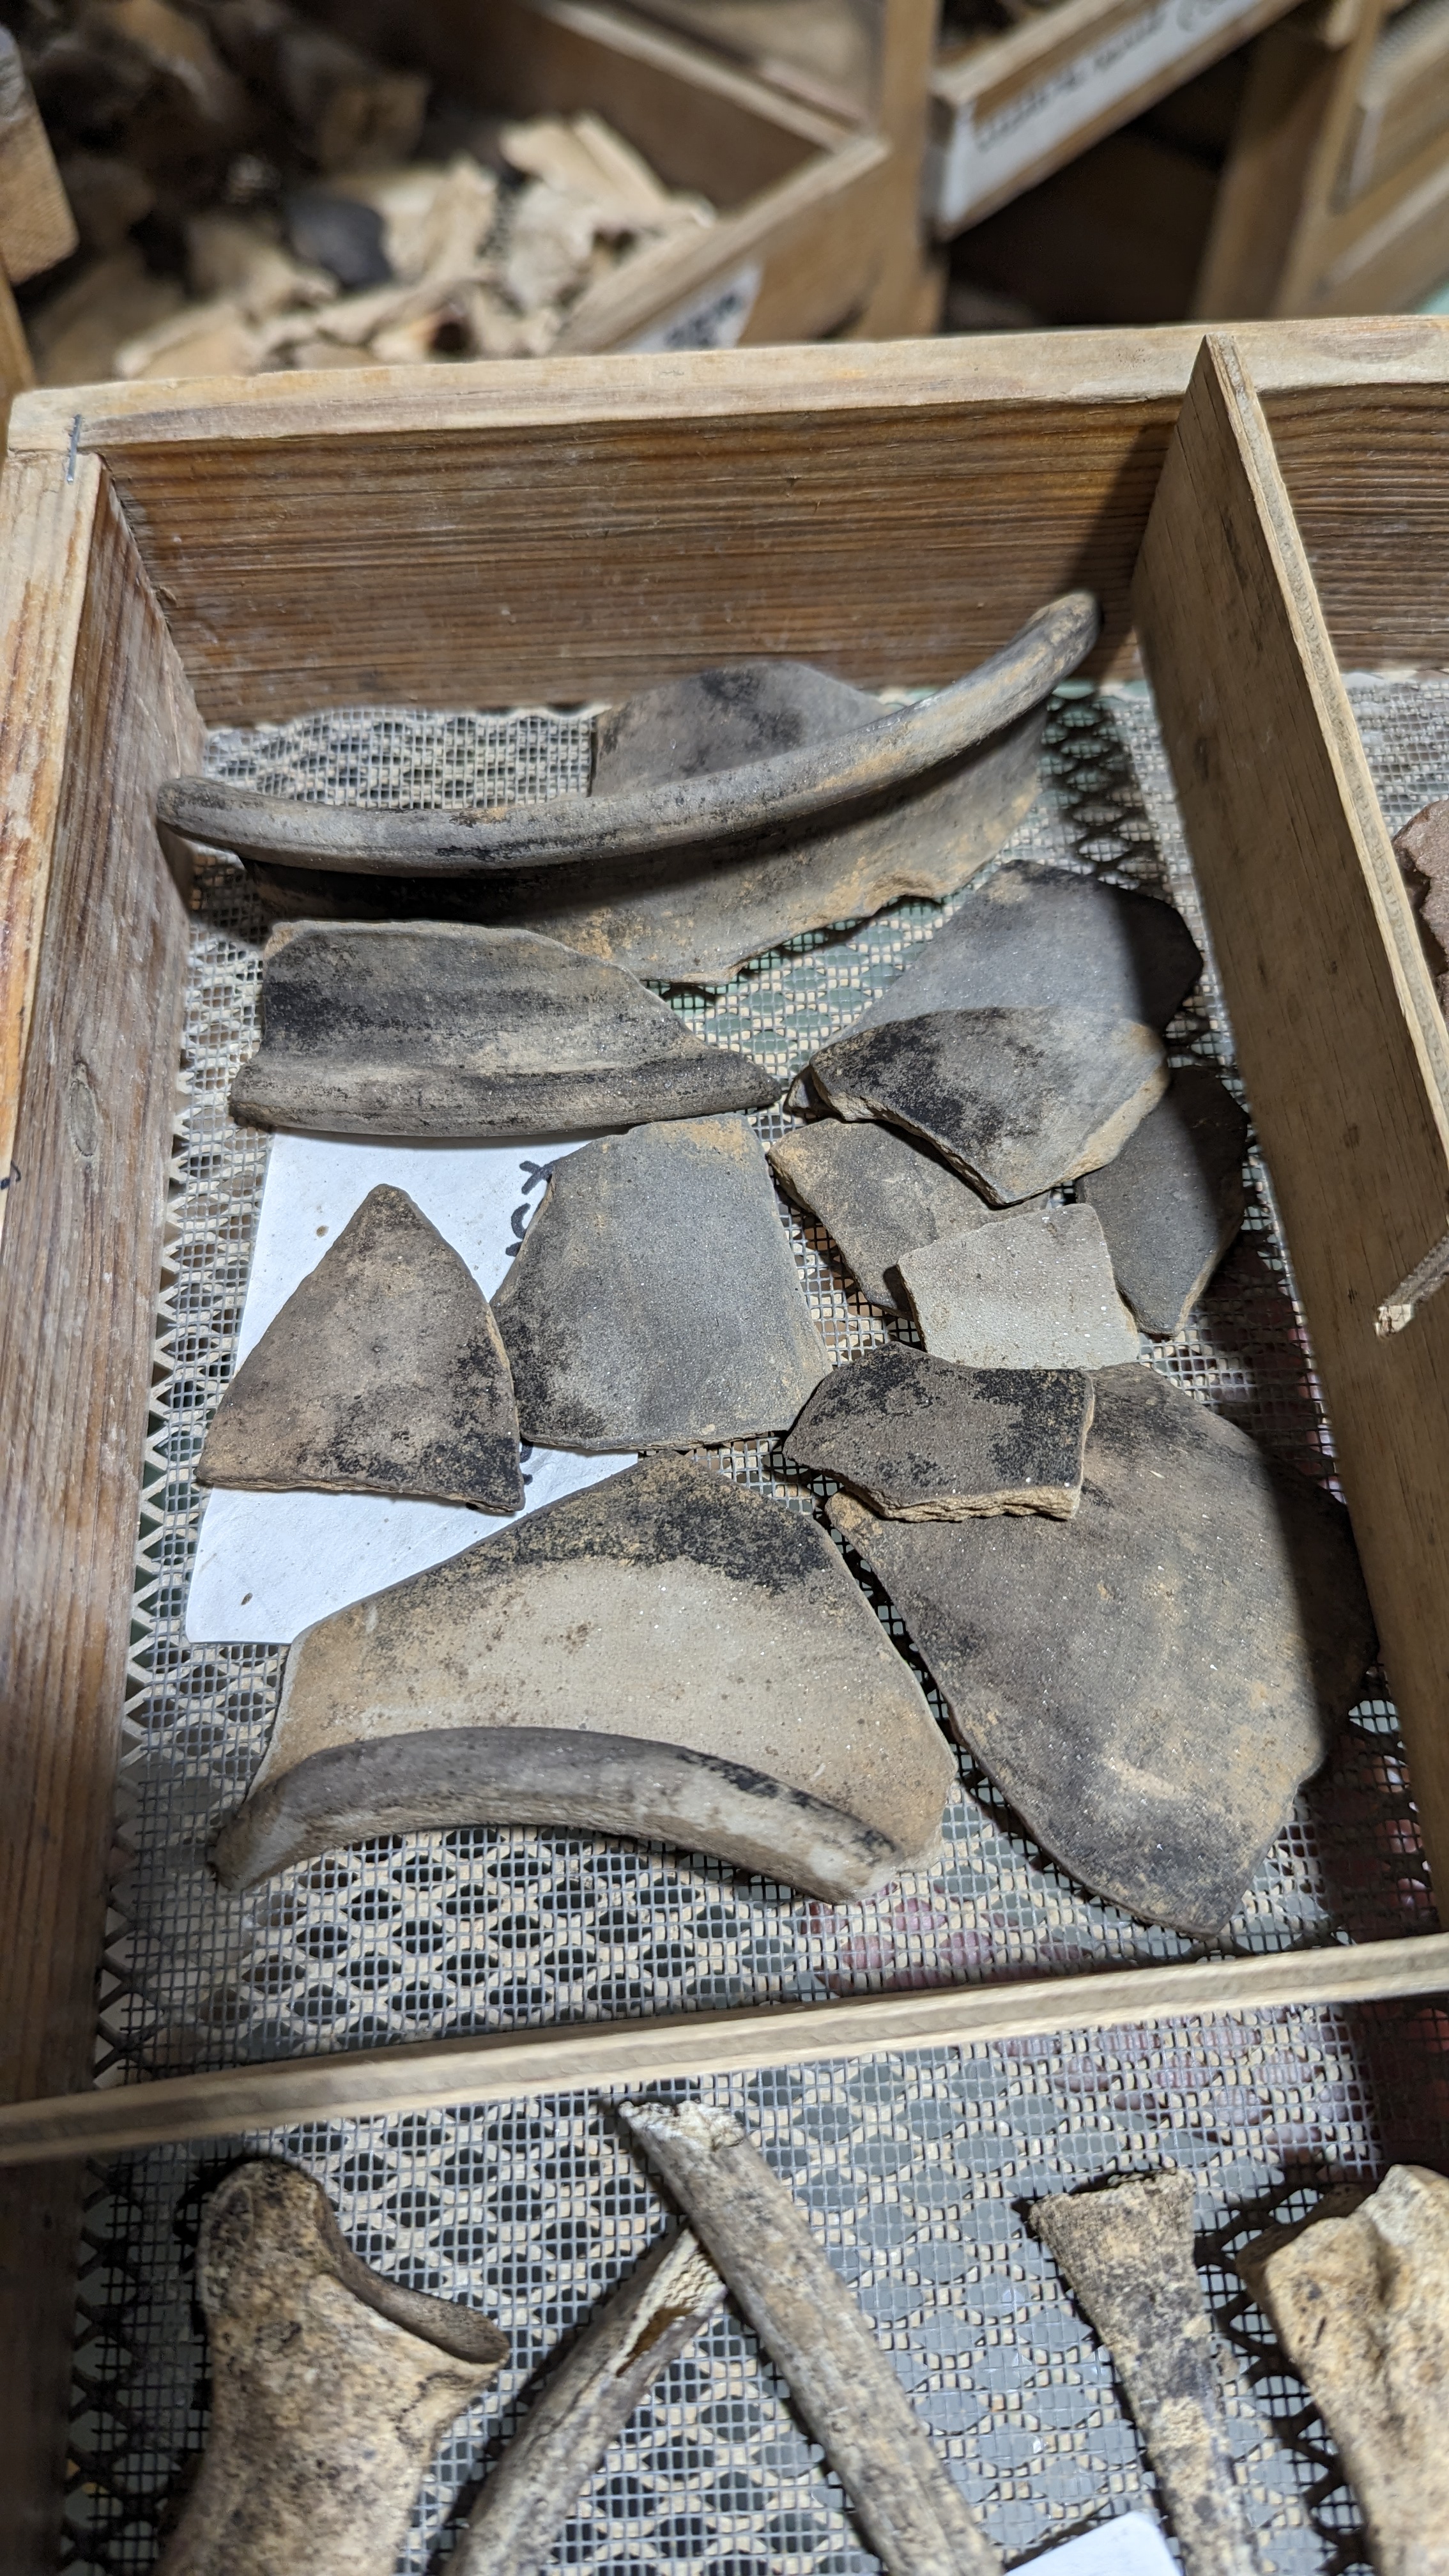 Black sherds of pottery in a finds tray.